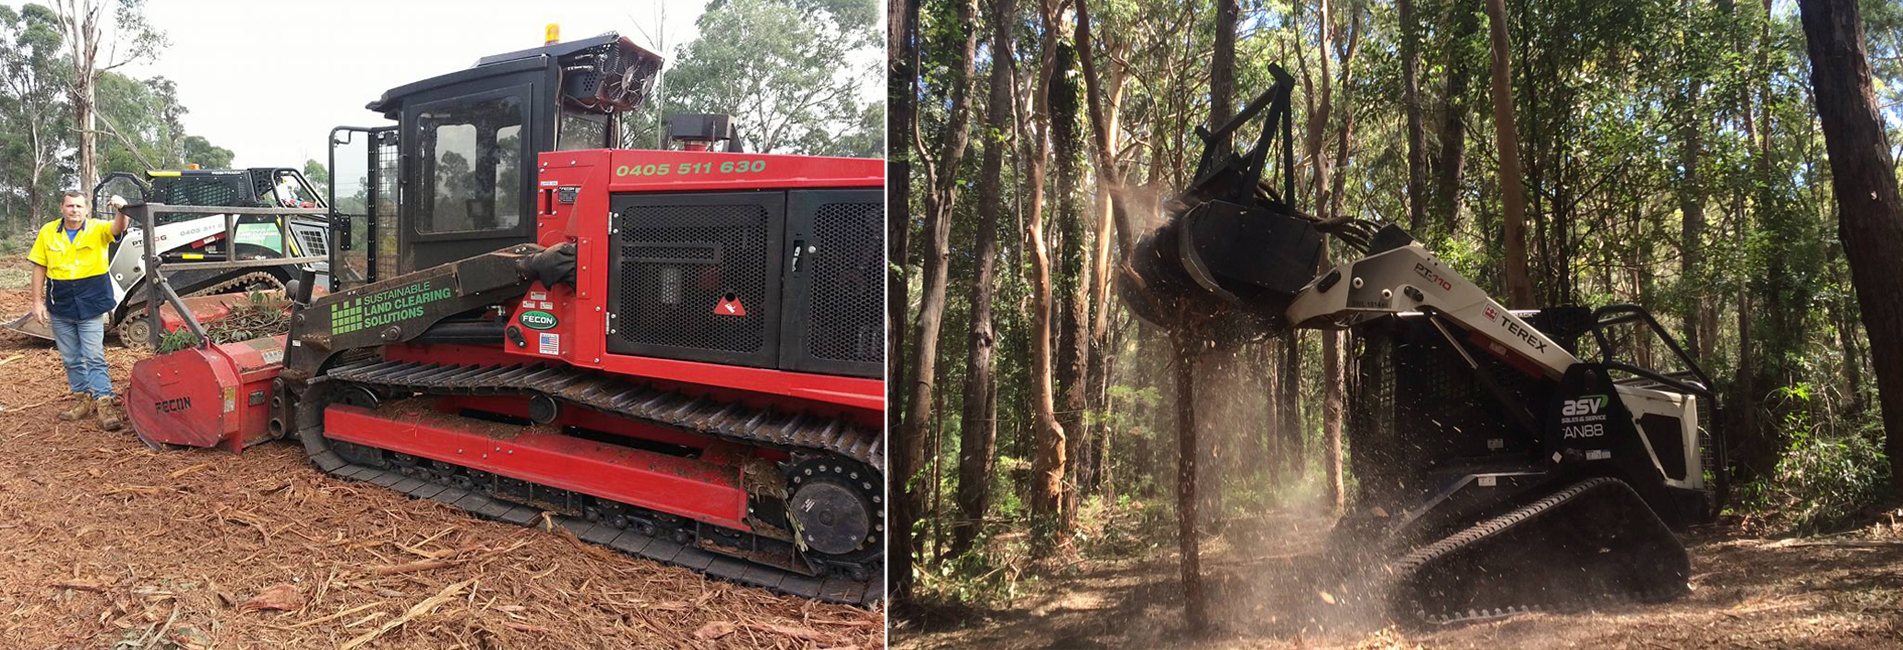 Green Waste Management Gosford, Mulch & Chip Sales Newcastle, Excavations Tuggerah, Tree Surgery Woy Woy, Fence Line Clearing Bateau Bay, Woodchipping Central Coast